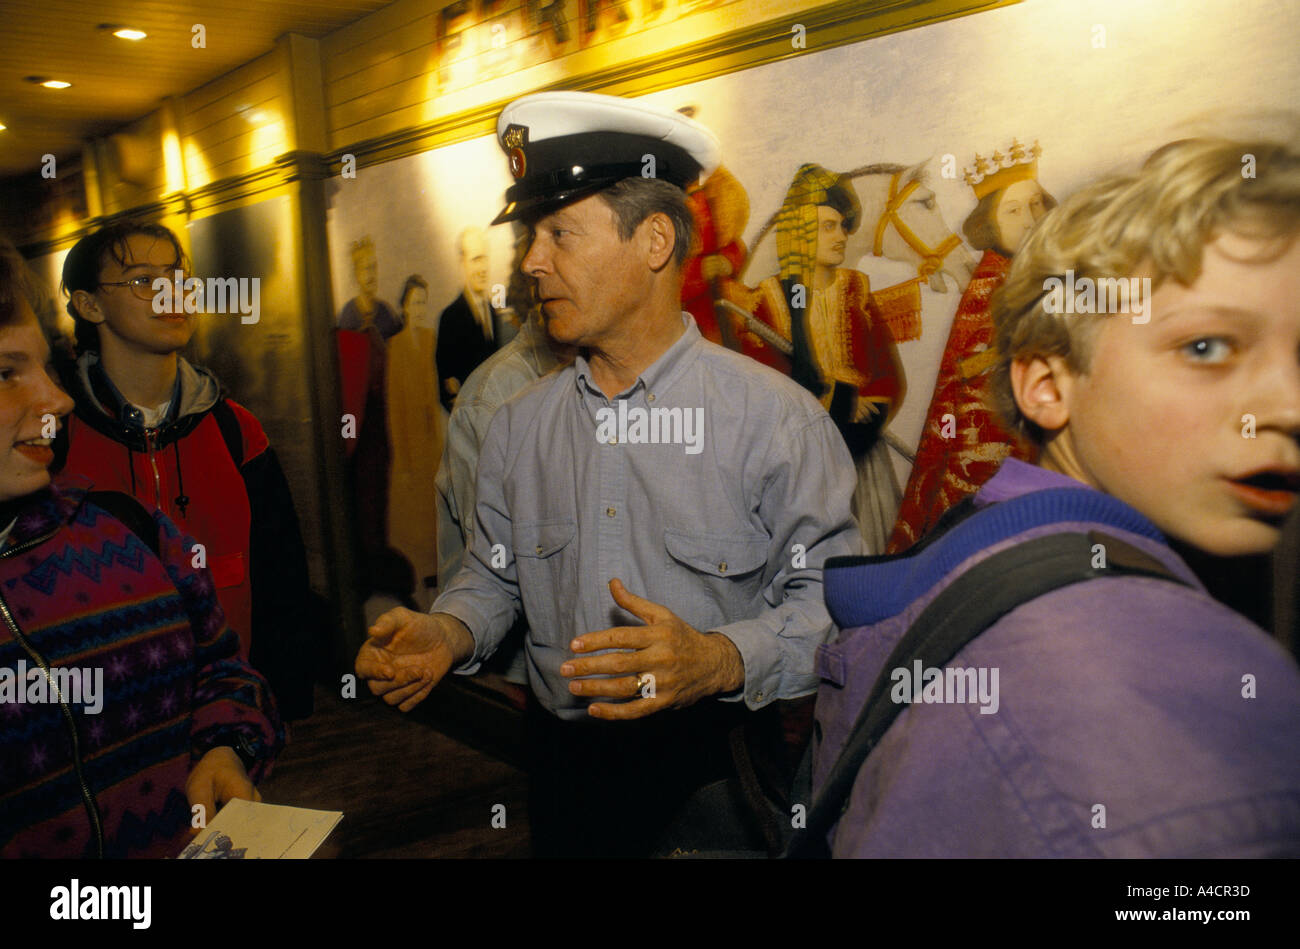 CHILDREN ENJOYING THE DISPLAYS AT THE WHITE CLIFFS EXPERIENCE IN DOVER, MAN WITH CAPTAIN HAT TALKING TO BOYS. DOVER, ENGLAND, MA Stock Photo